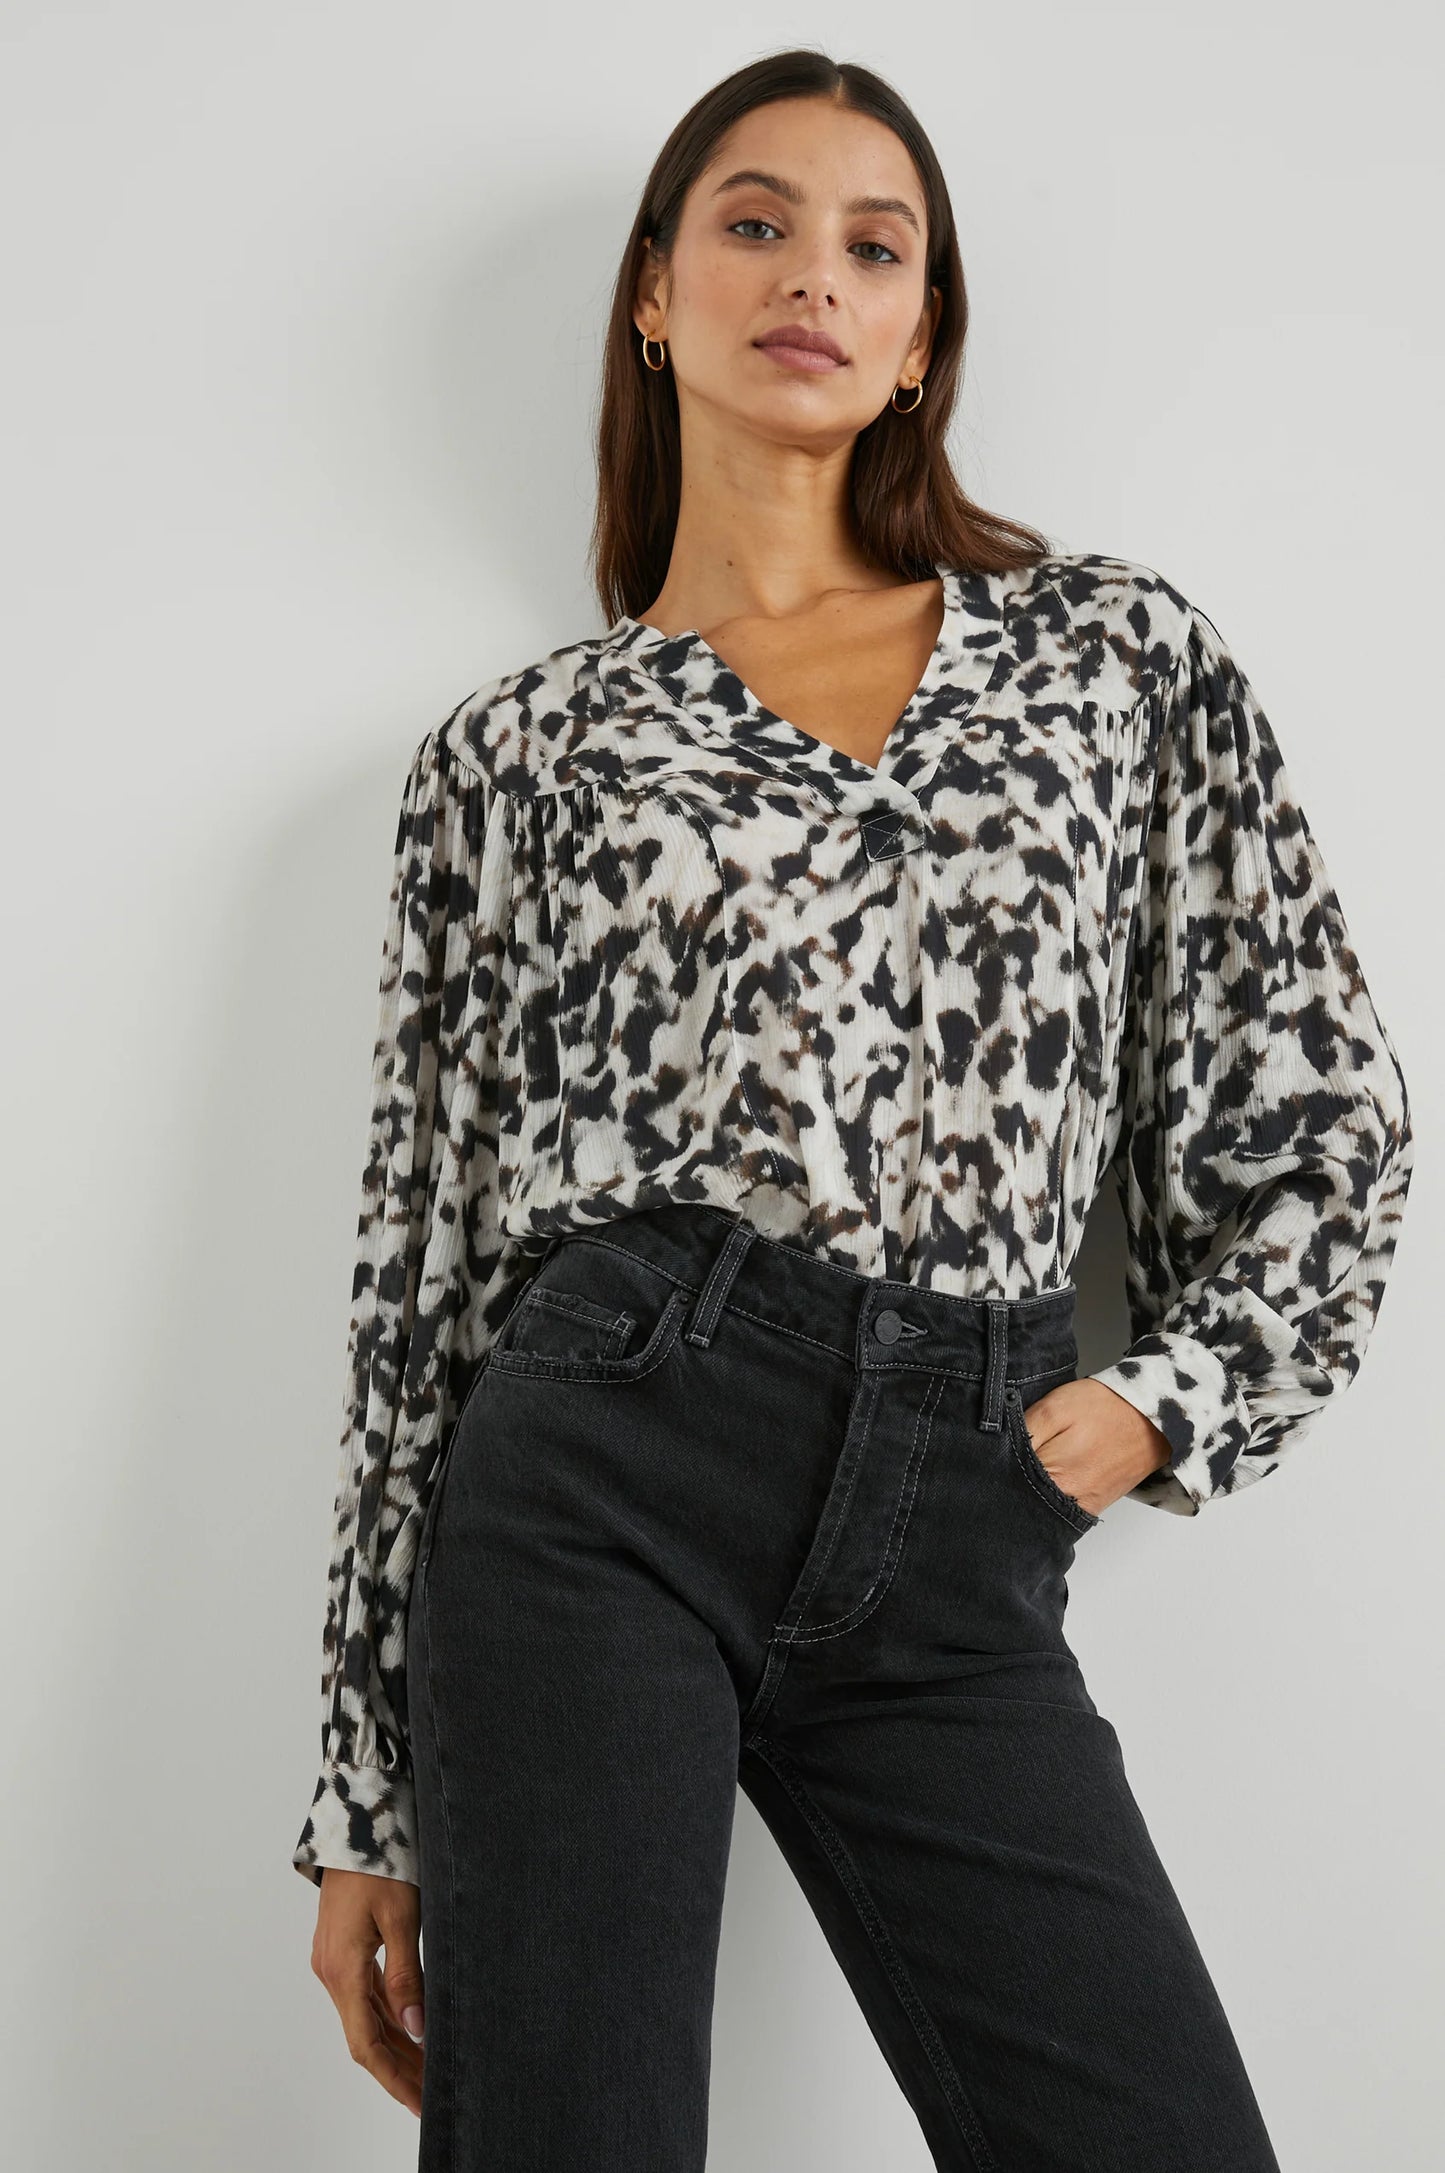 Fable Top by Rails